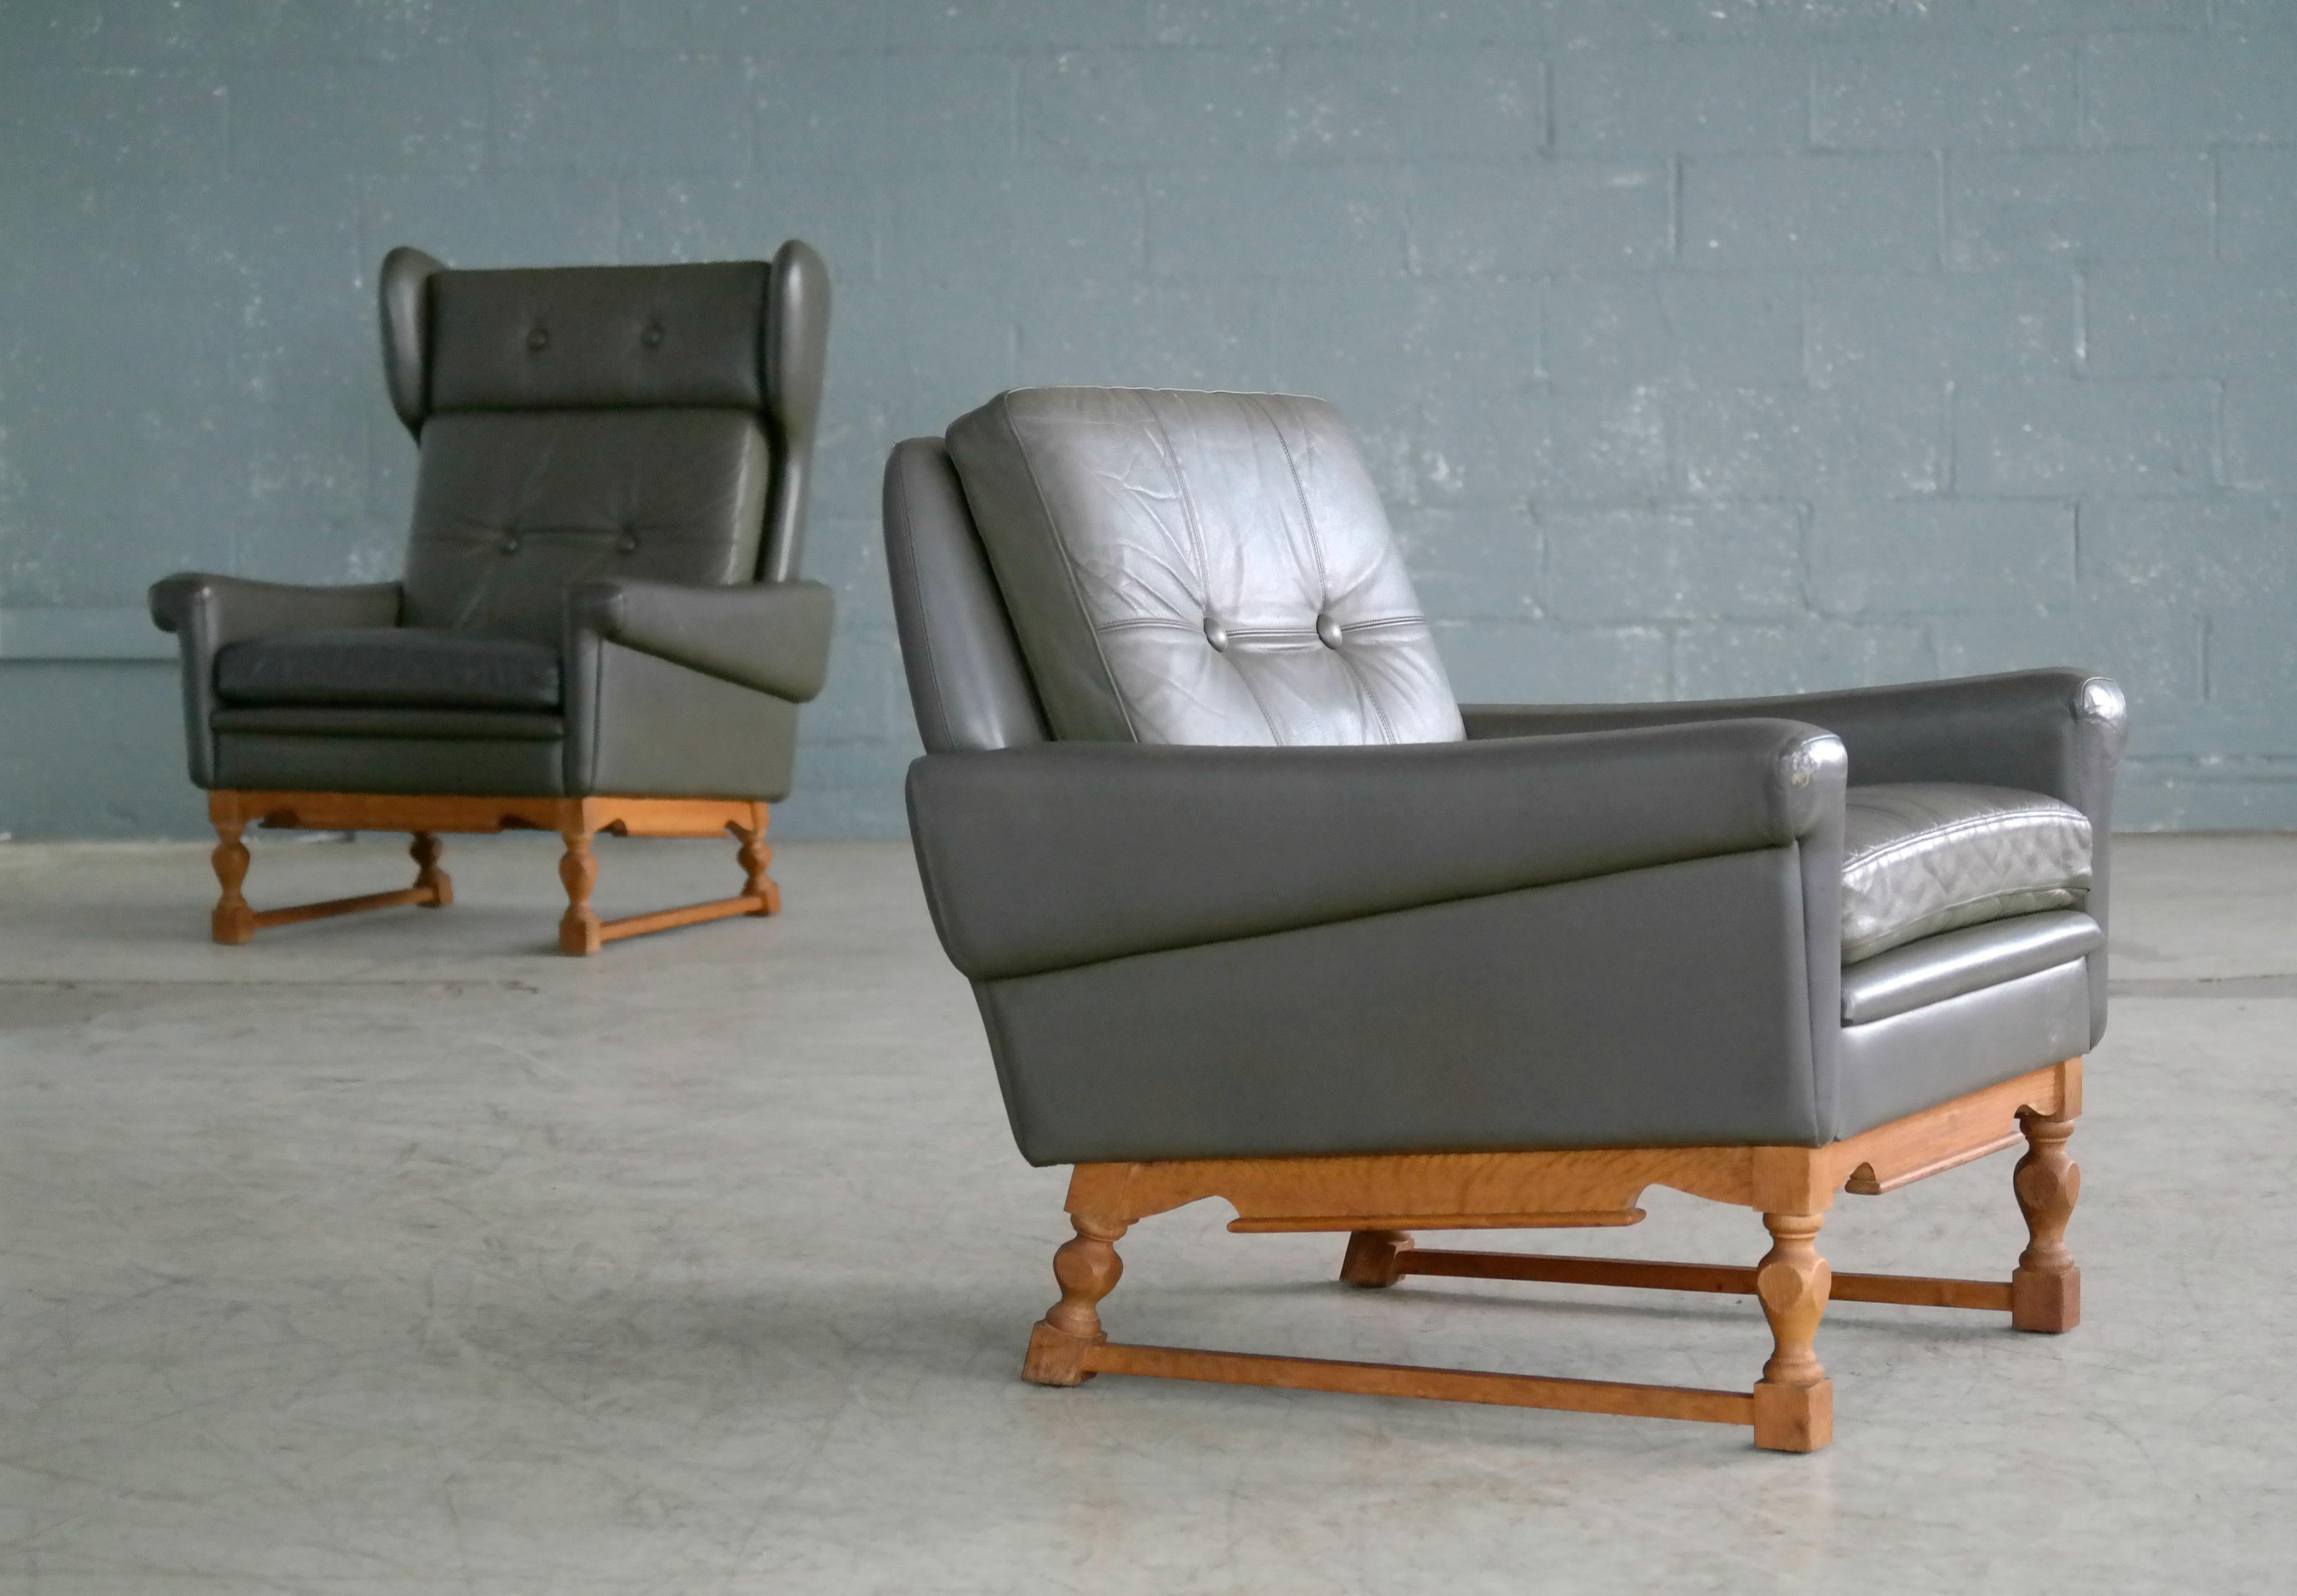 Super stylish pair of 1960s lounge chairs in gray green leather by Sven Skipper. The chairs are one of Sven Skipper's classic well-known and sought after designs but with a certain twist as the pair has been supplied with custom made bases of